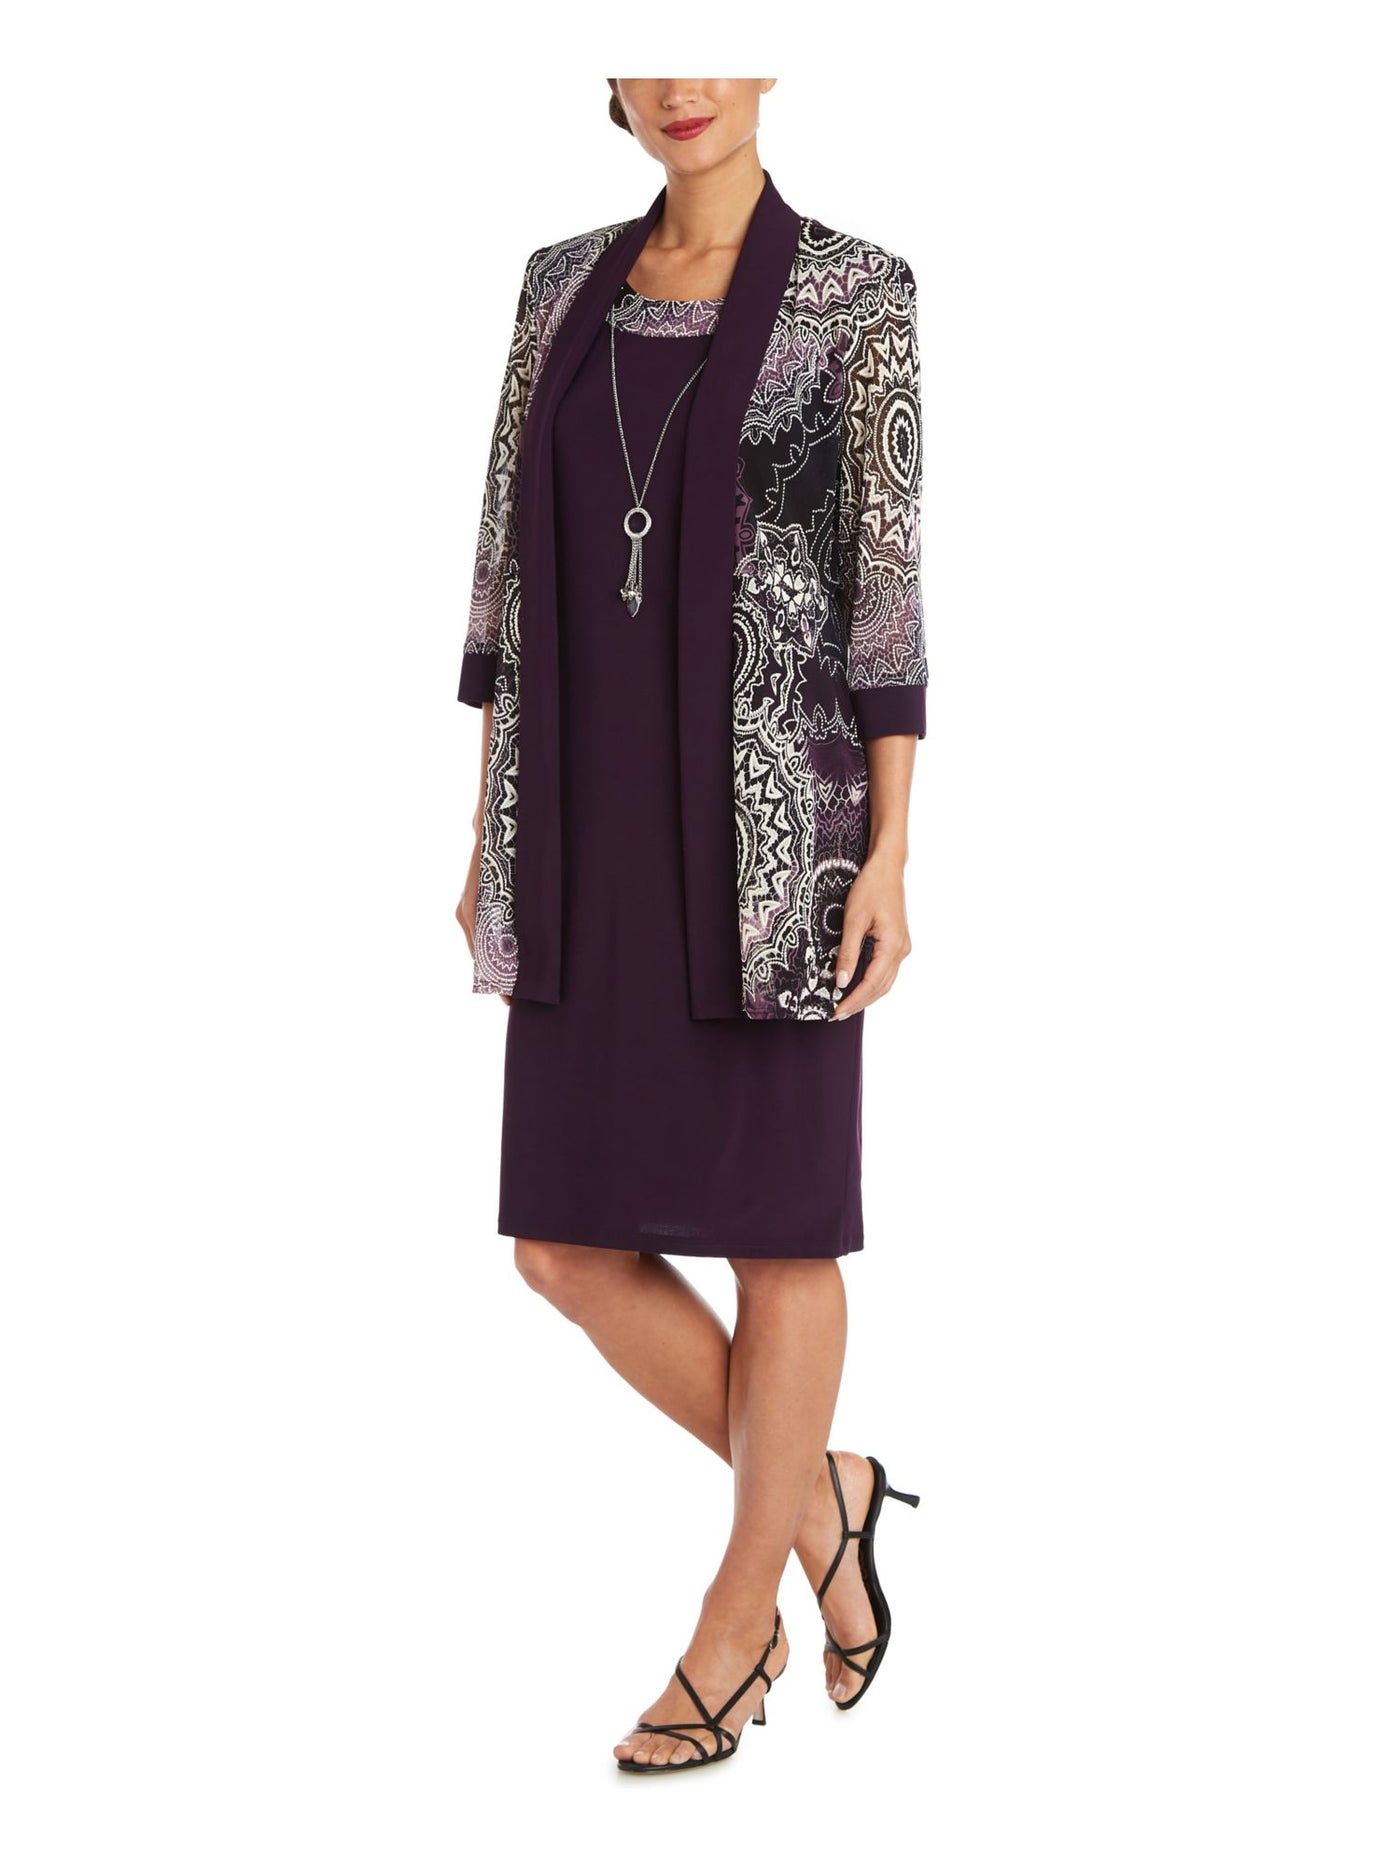 R&M RICHARDS Womens Purple Textured Sheer 3/4 Sleeve Open Front Wear To Work Jacket Petites 6P